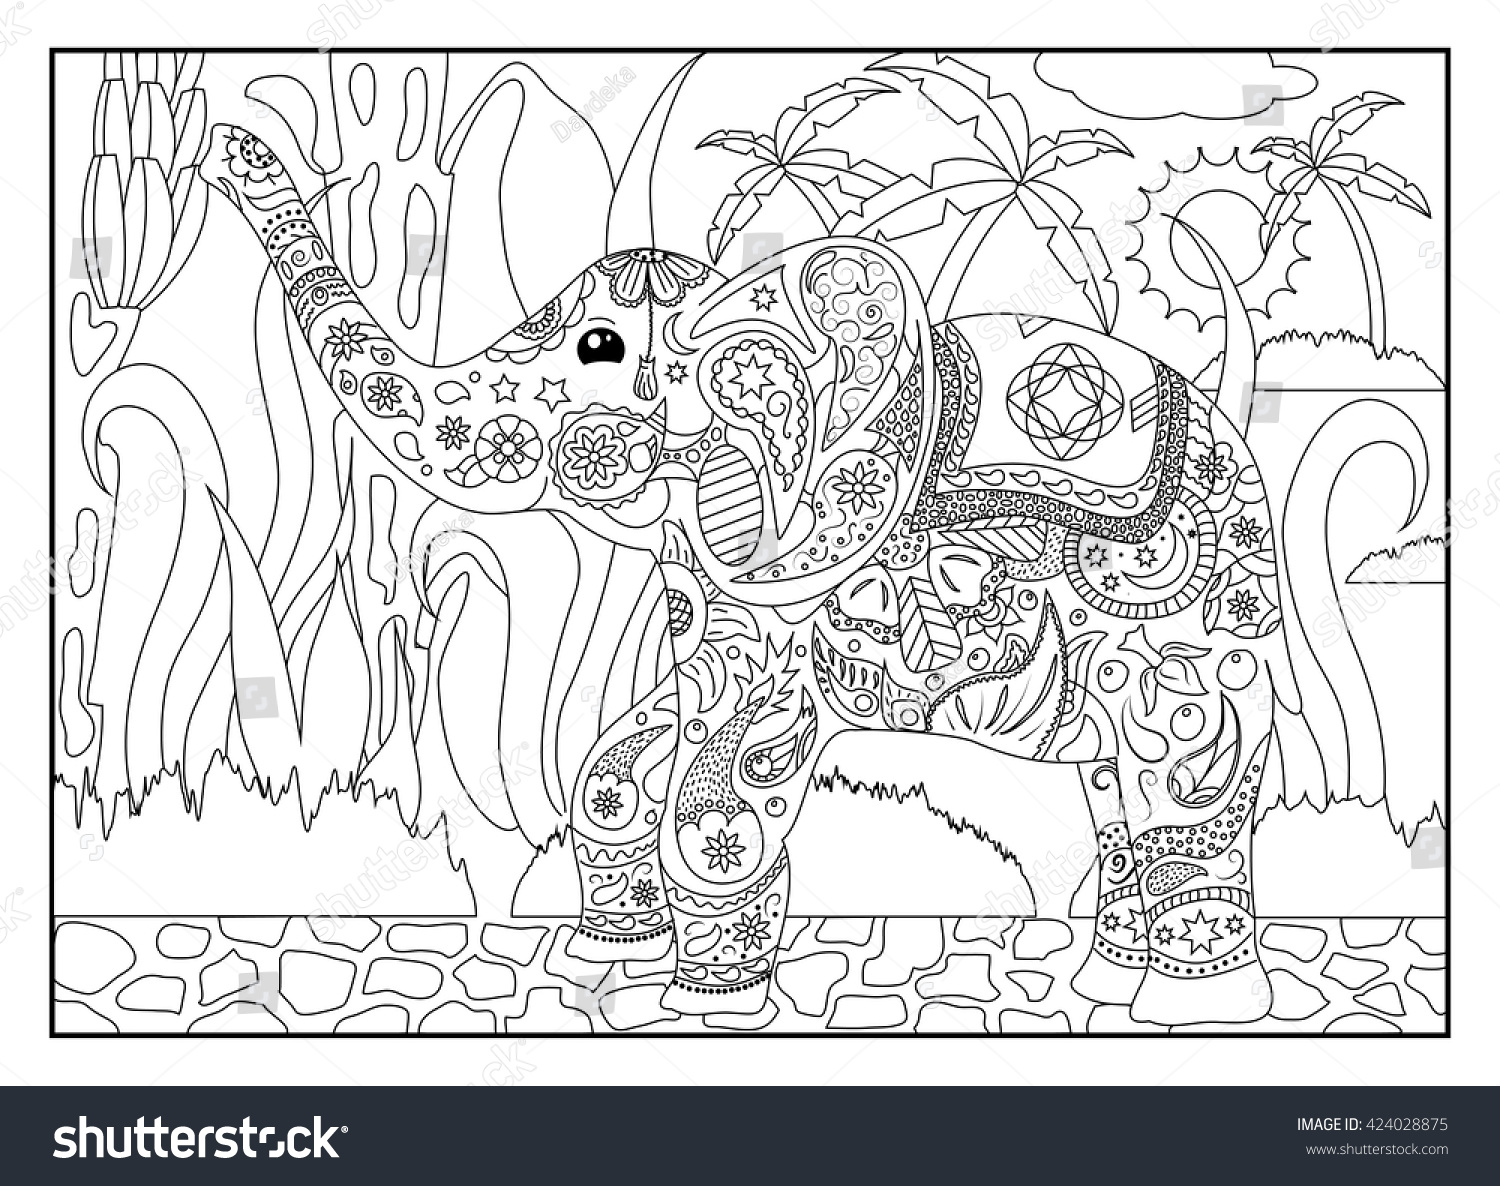 Coloring Page Elephant Jungle Adult Coloring Stock Vector 424028875 ...